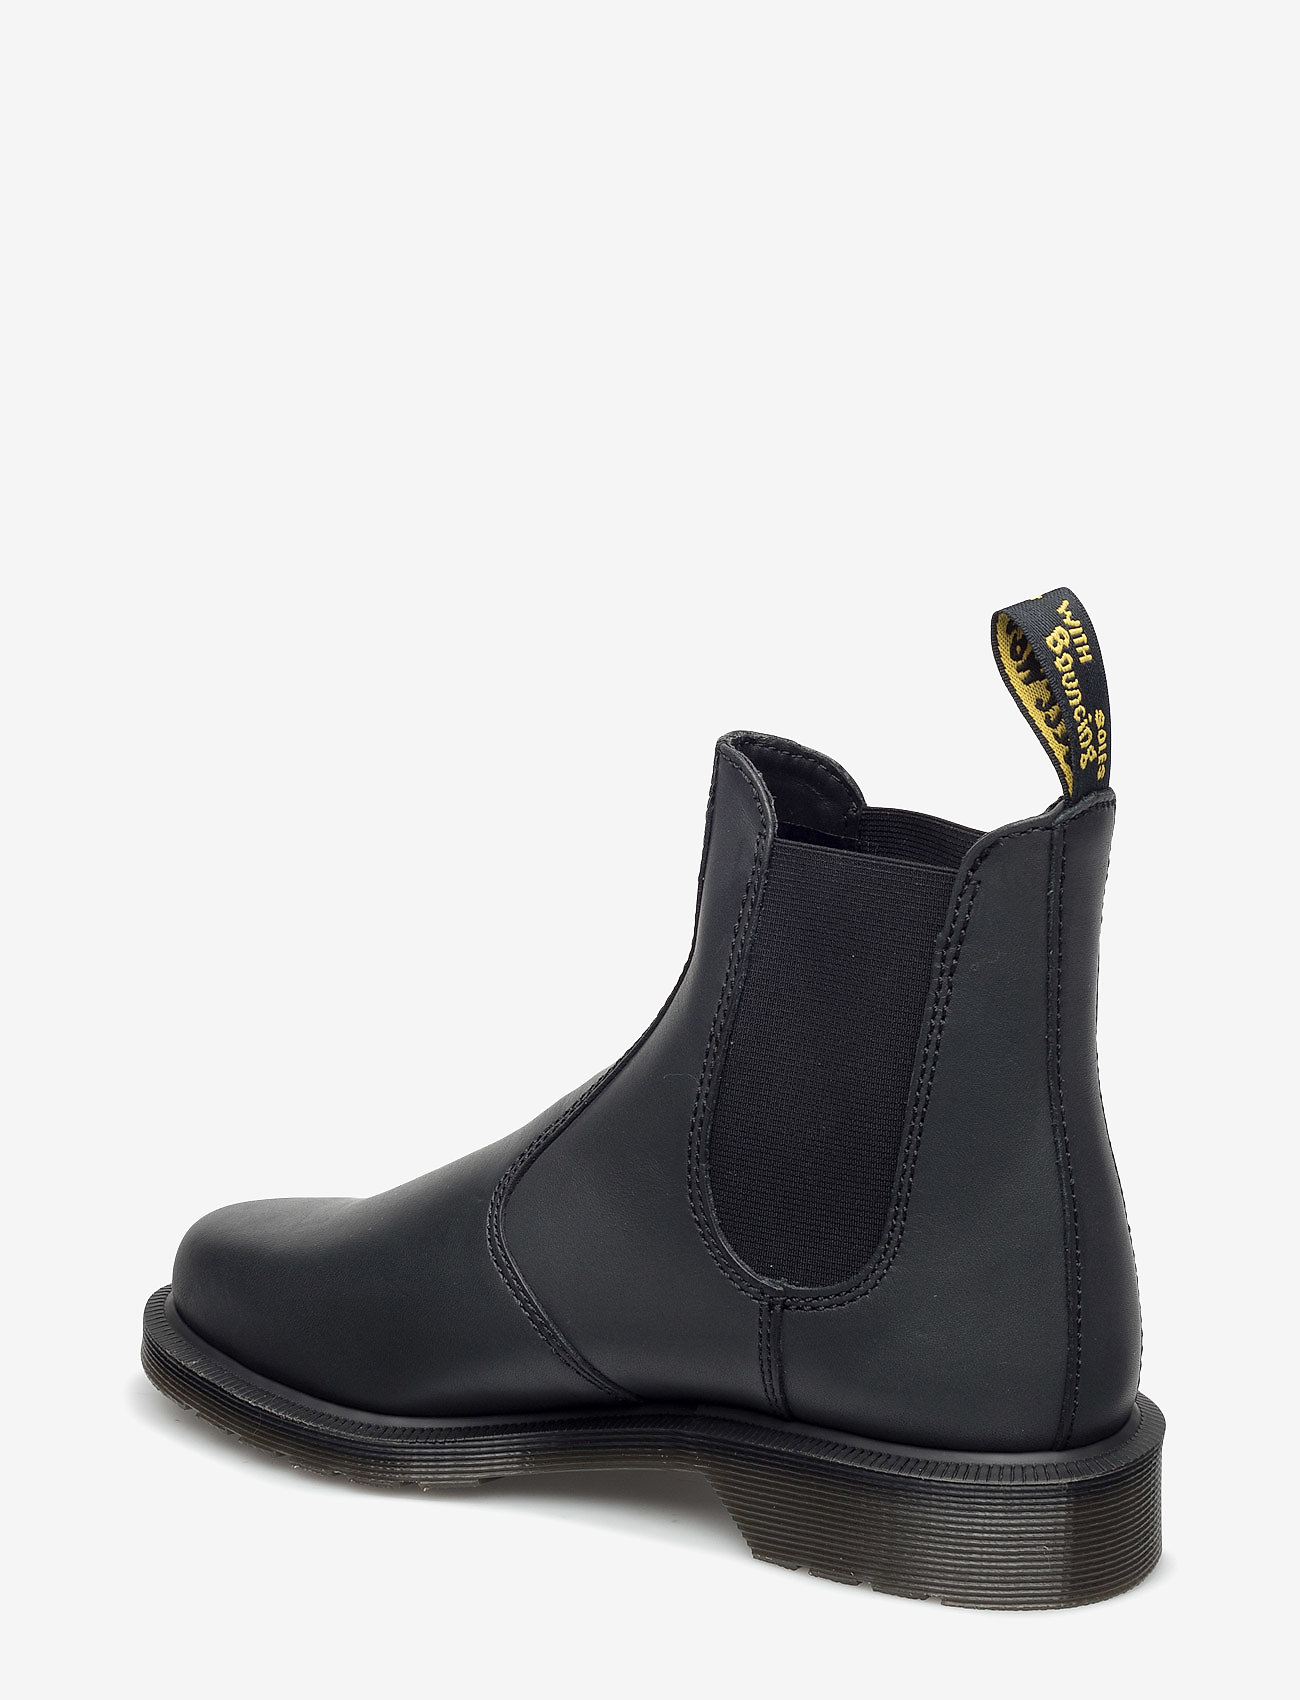 dr martens free delivery code